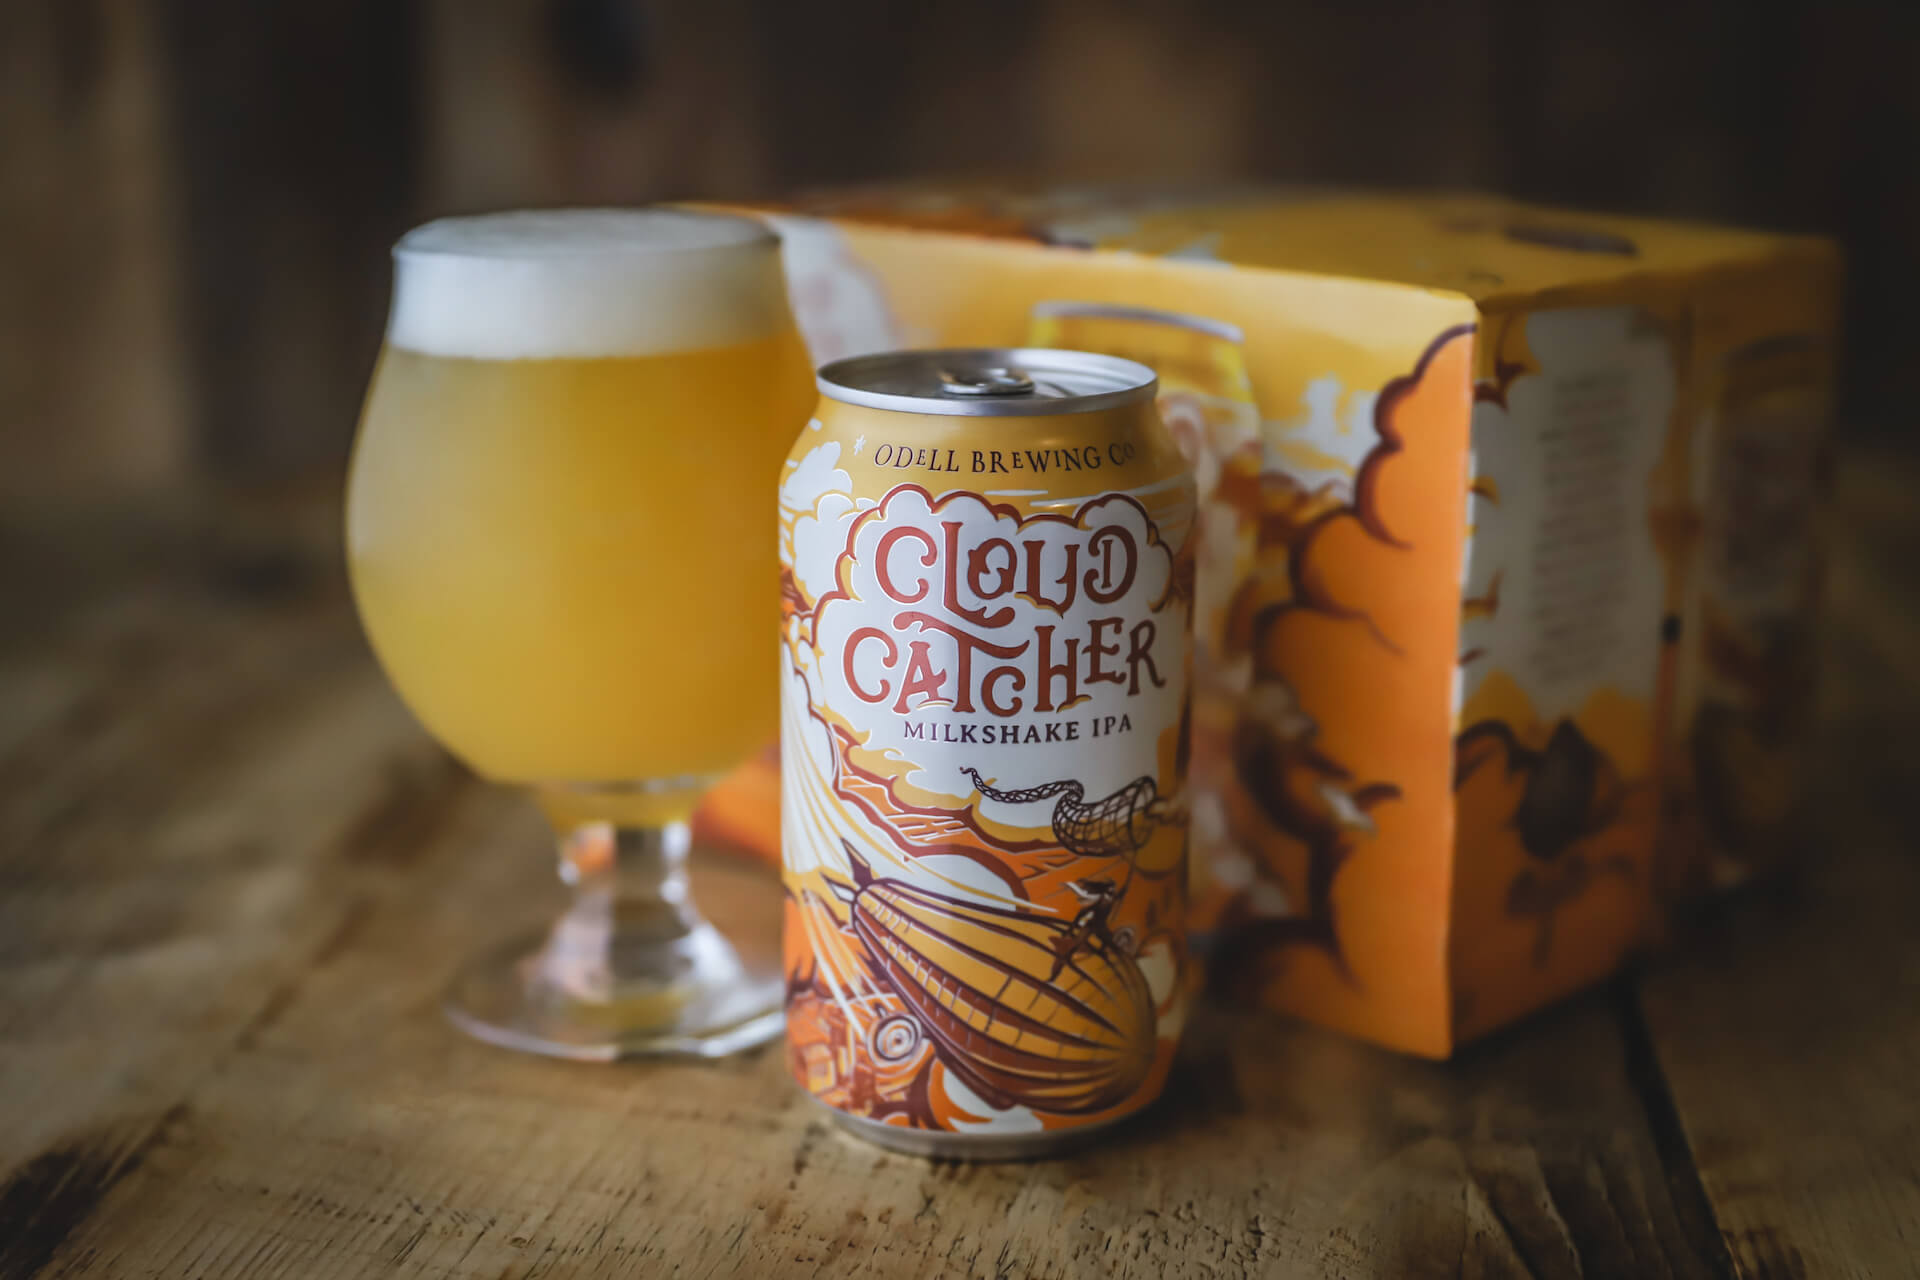 Odell Brewing Co Cloud Catcher IPA